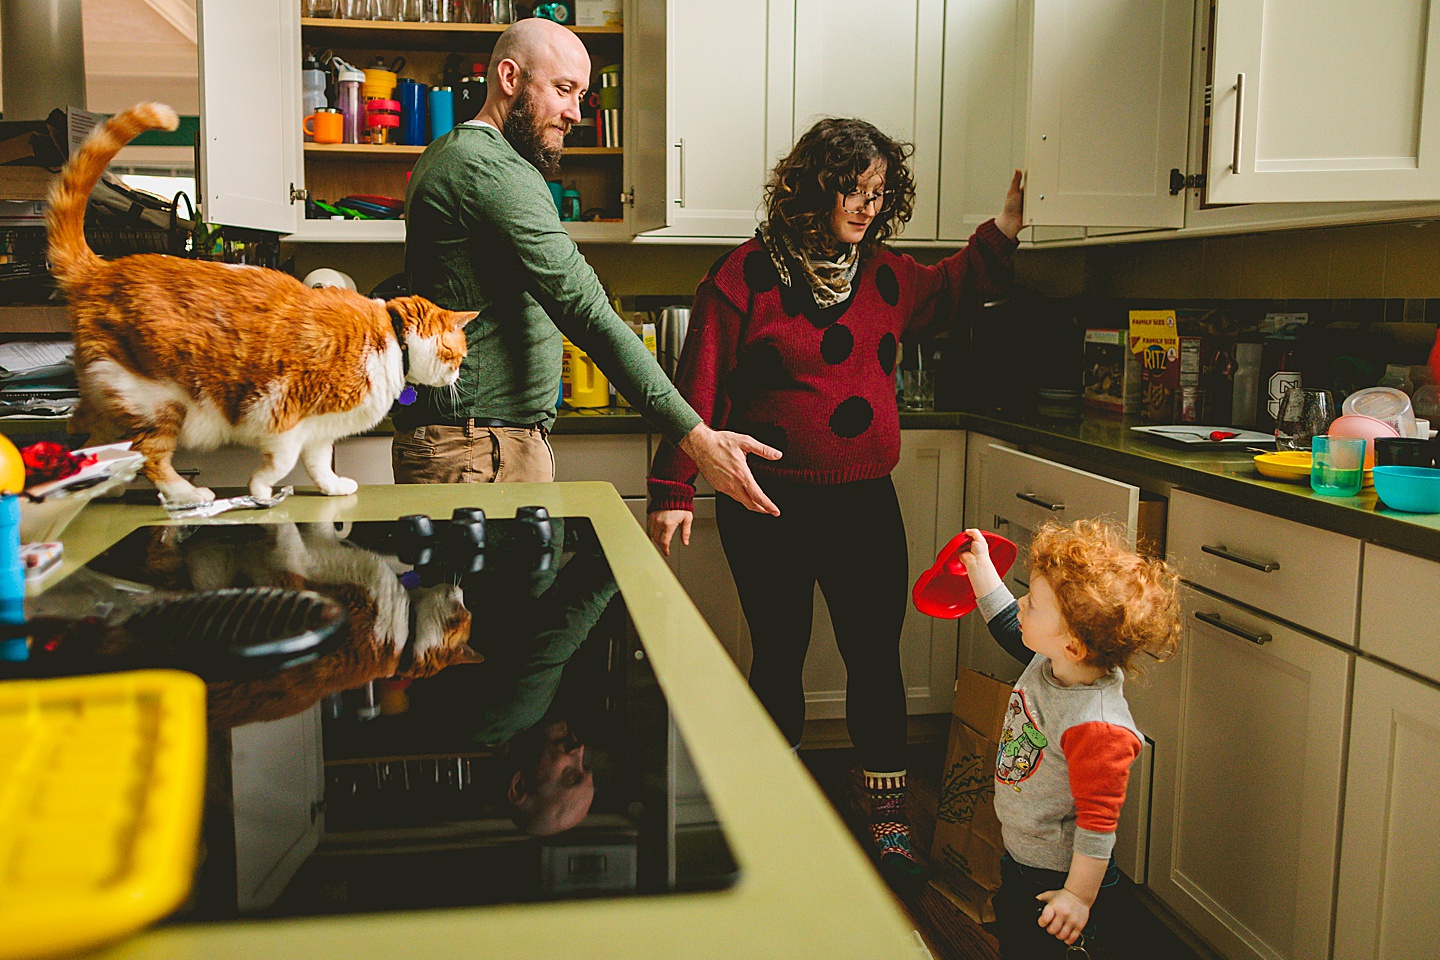 Toddler unloading dishwasher and helping to hand dishes to his parents while tabby cat stands on counter